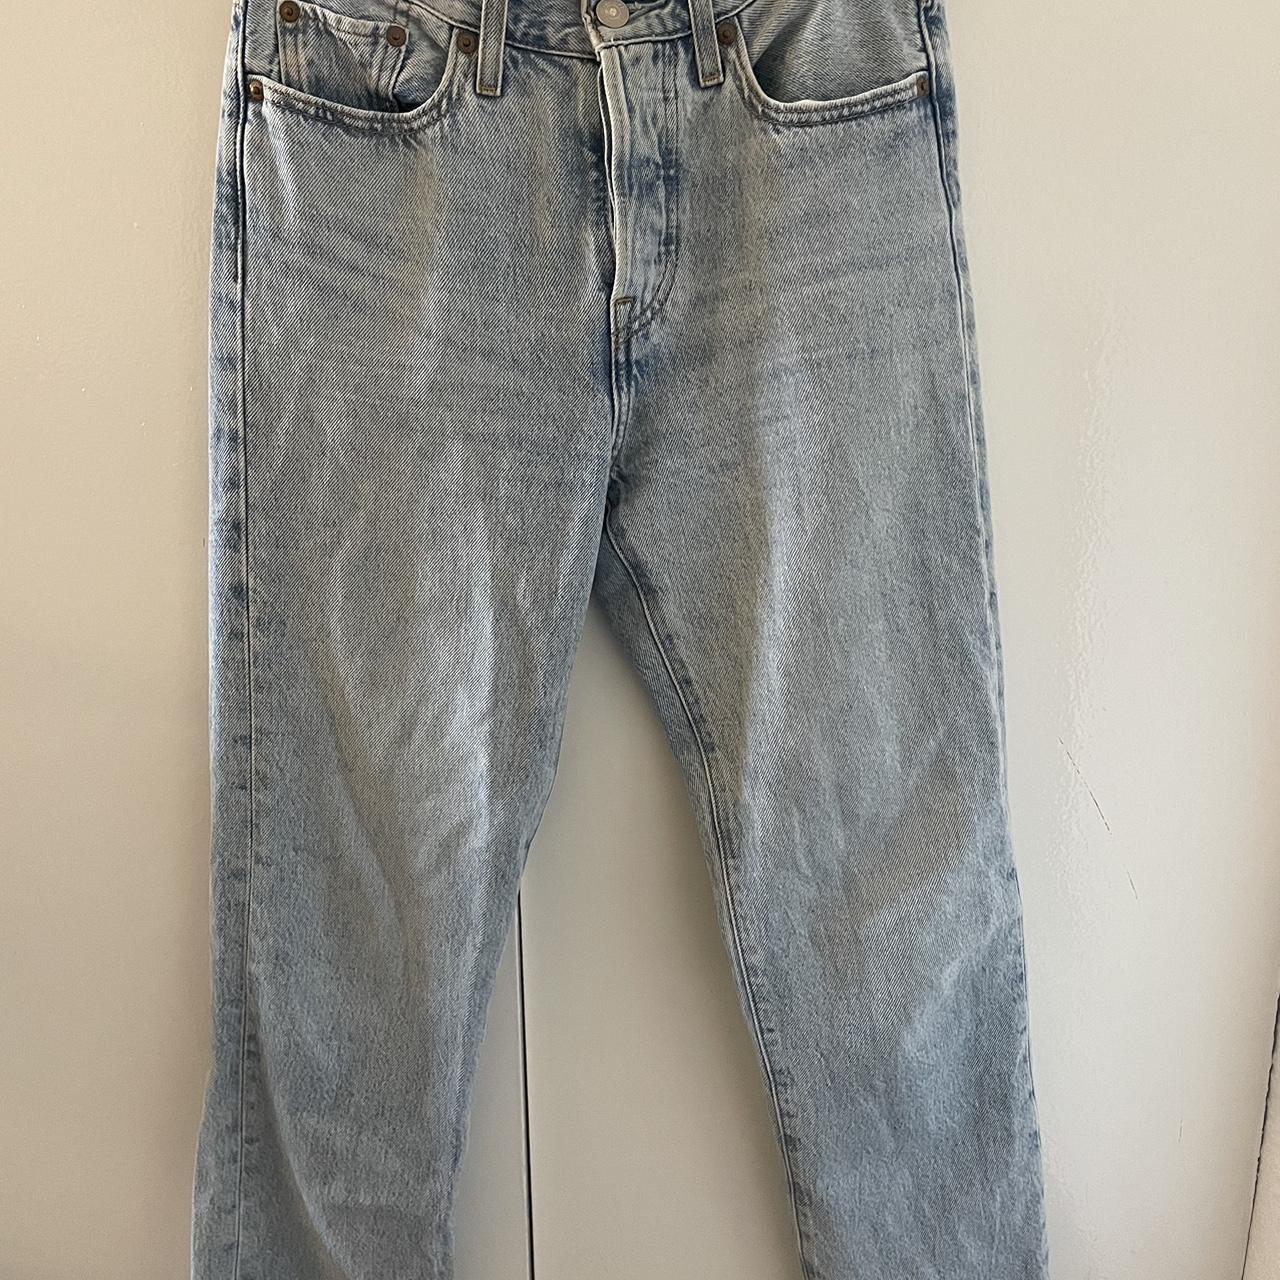 Levi’s Wedgie Straight Jeans Size 25, L28 and would... - Depop